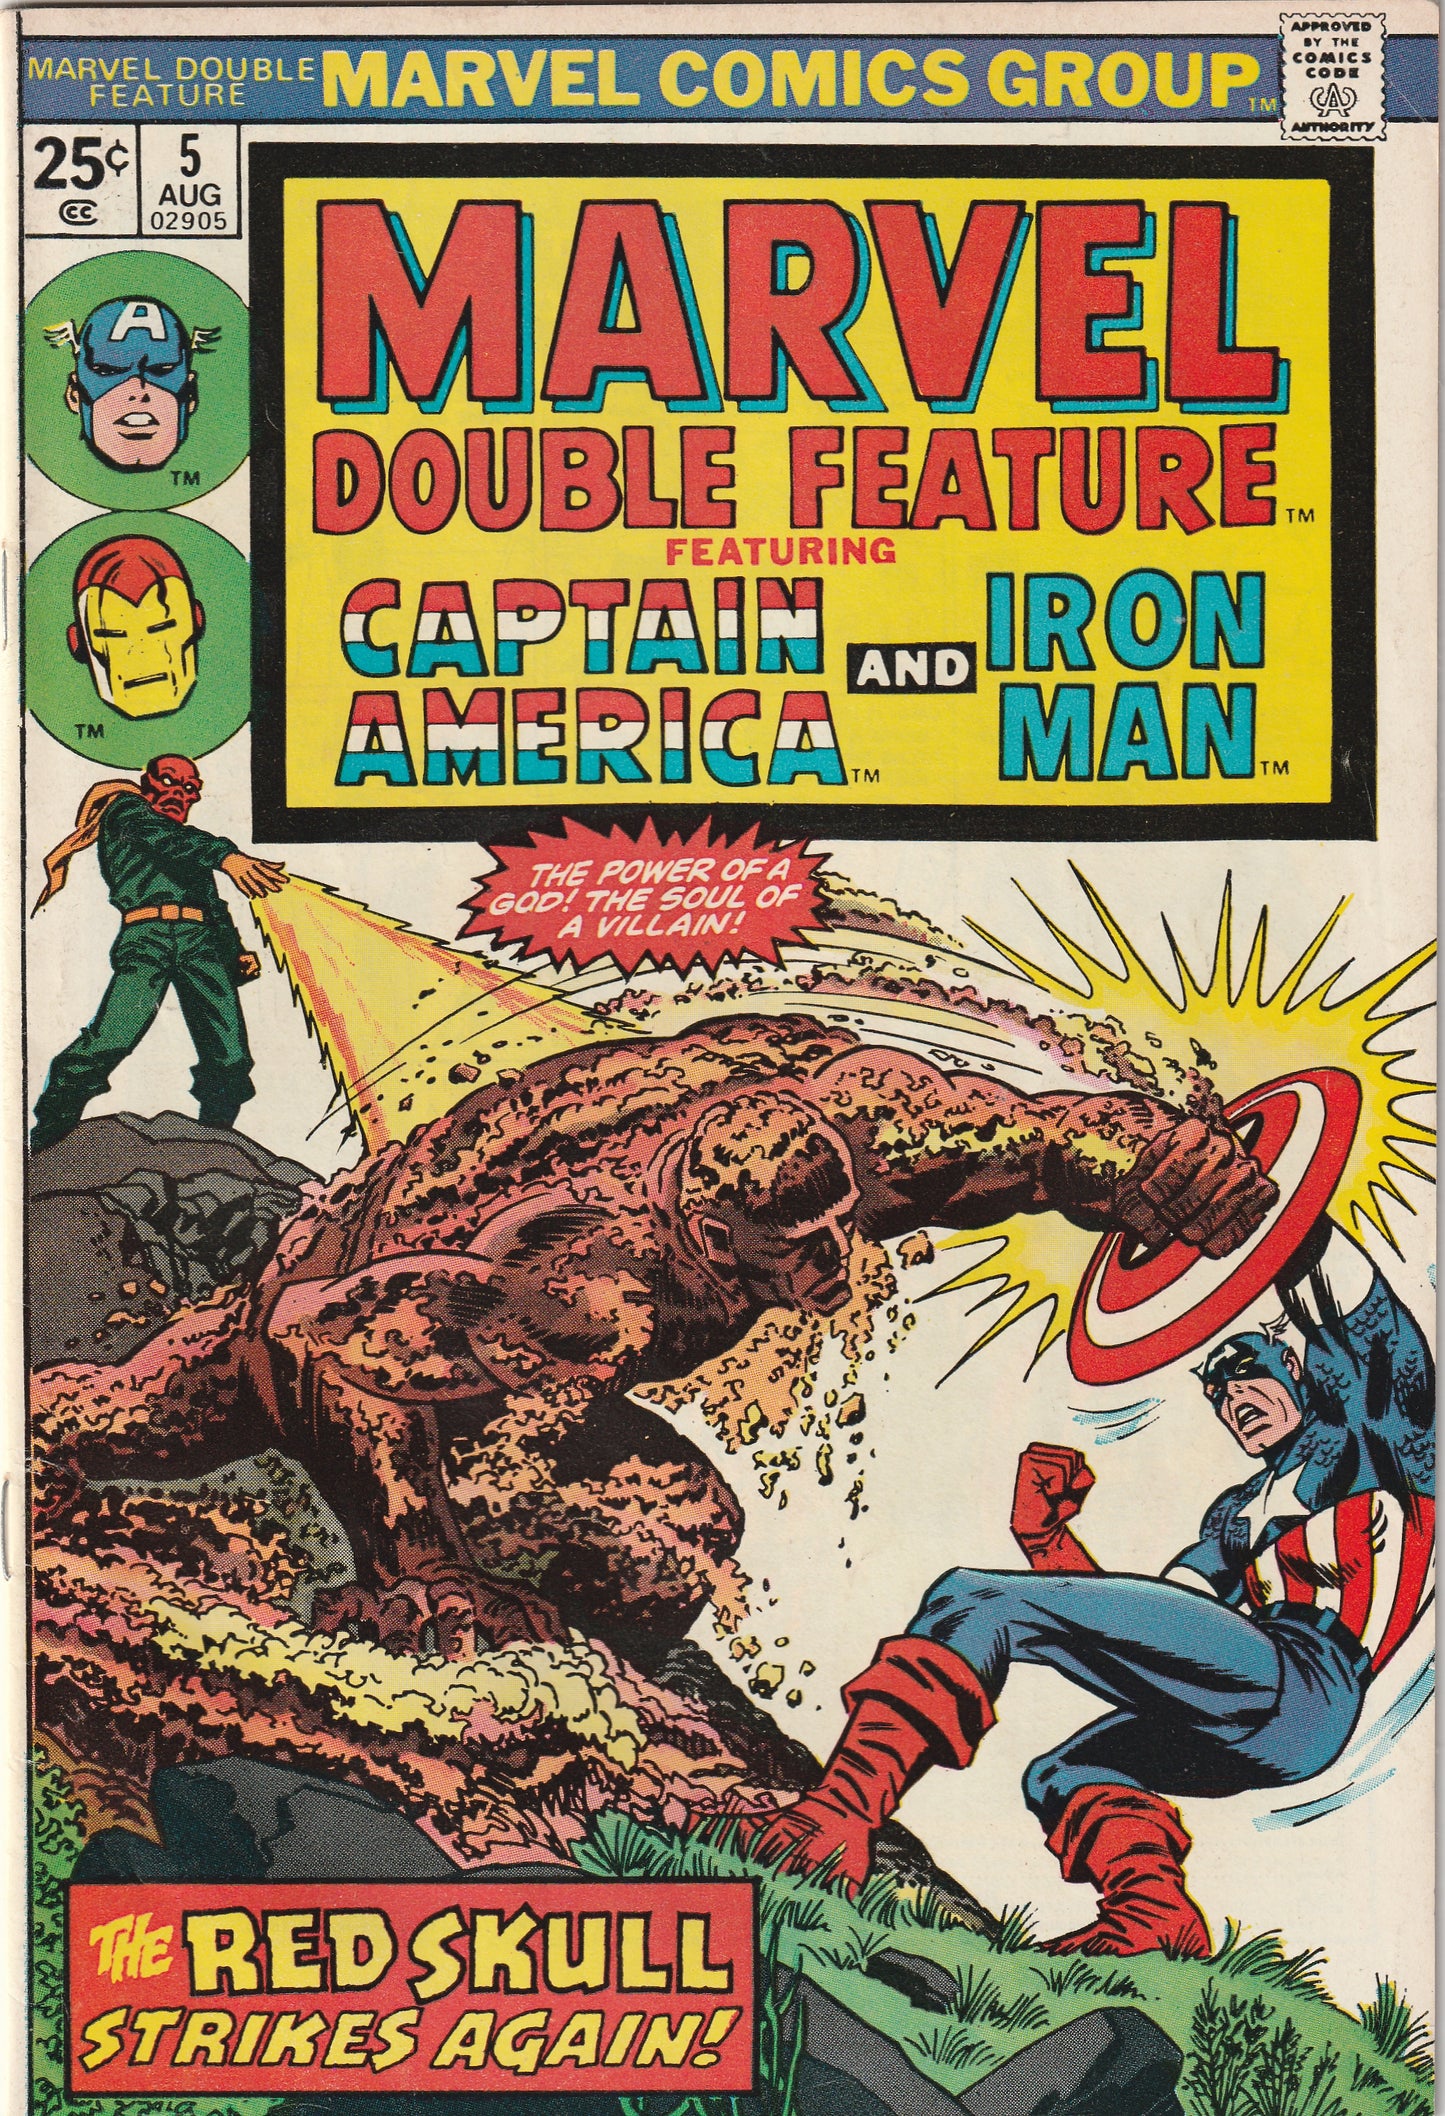 Marvel Double Feature #5 (1974) Featuring Captain America and Iron Man